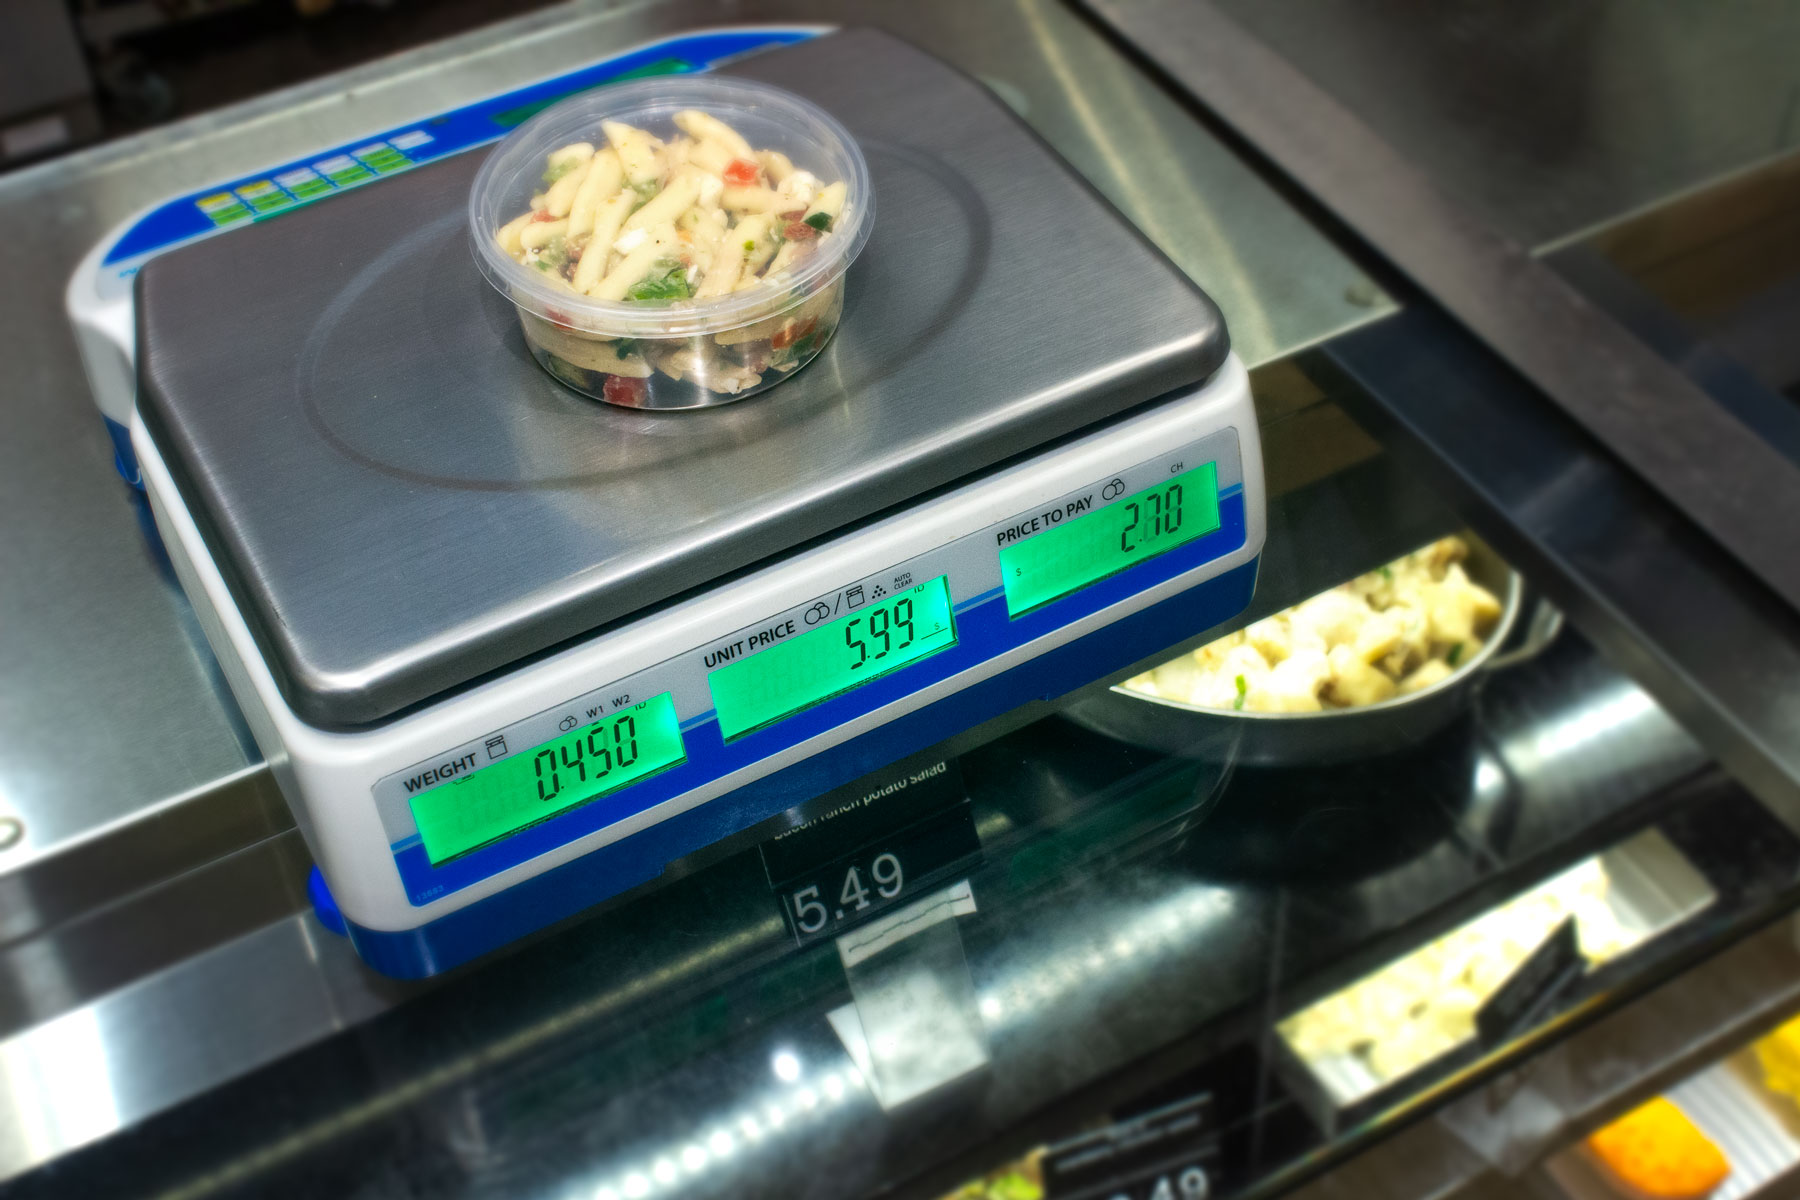 Swift SWZ weighing pasta at a deli